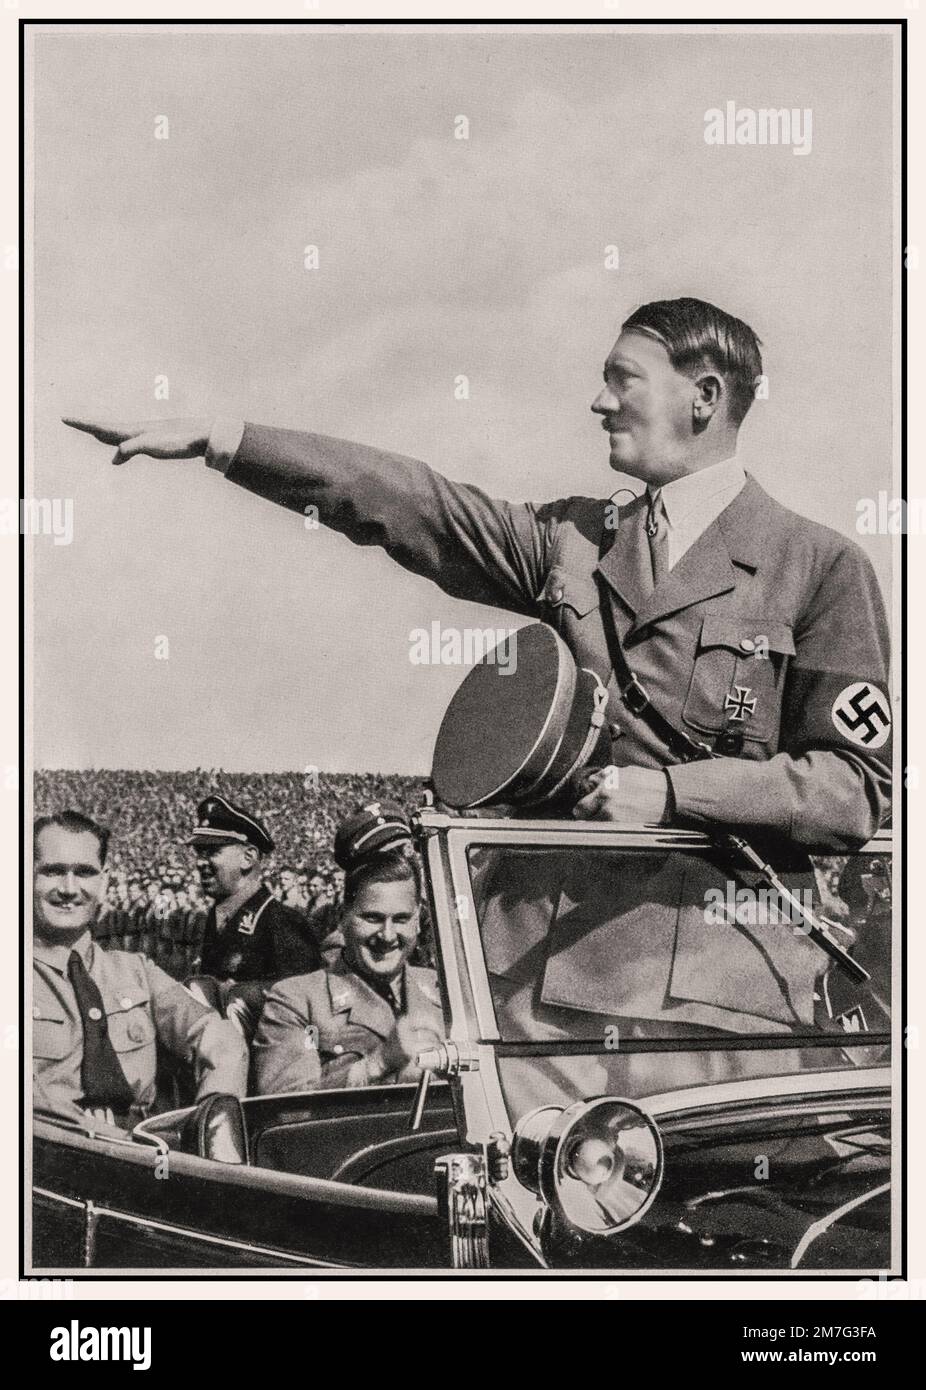 Adolf Hitler wearing a swastika armband at a 1930’s Nazi Party Nuremberg rally, with Rudolf Hess sitting behind, standing in the front of his open top Mercedes motorcar saluting the passing troops of the NSDAP political party military wing Hitler Nuremberg Rally Heil Hitler salute s Nazi Gemany 1930s Stock Photo